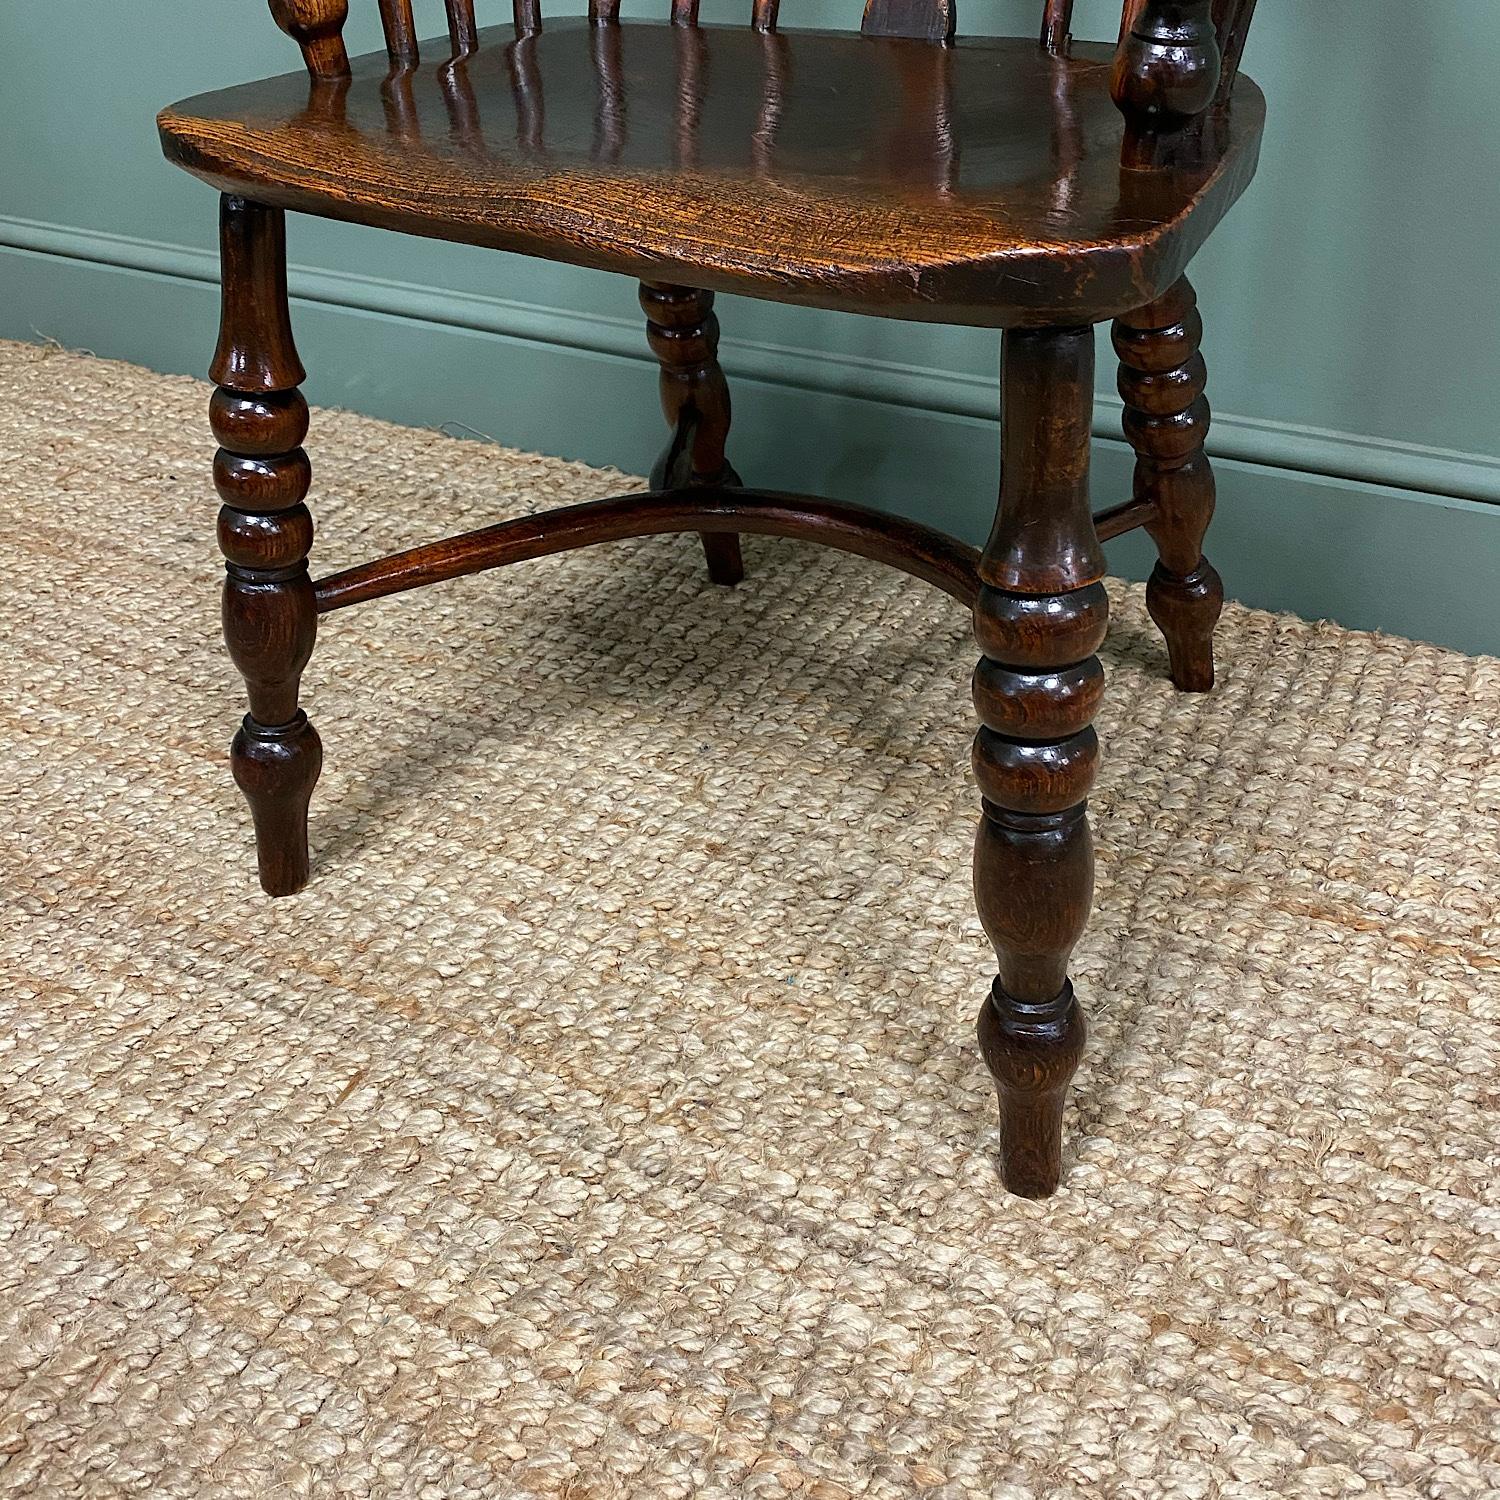 Country House Georgian oak and elm antique Windsor chair

Dating From the 19th century around 1840, This Delightful late Georgian / Early Victorian Oak And Elm Windsor Chair Has A Curved spindle back with shaped back splat and a beautifully